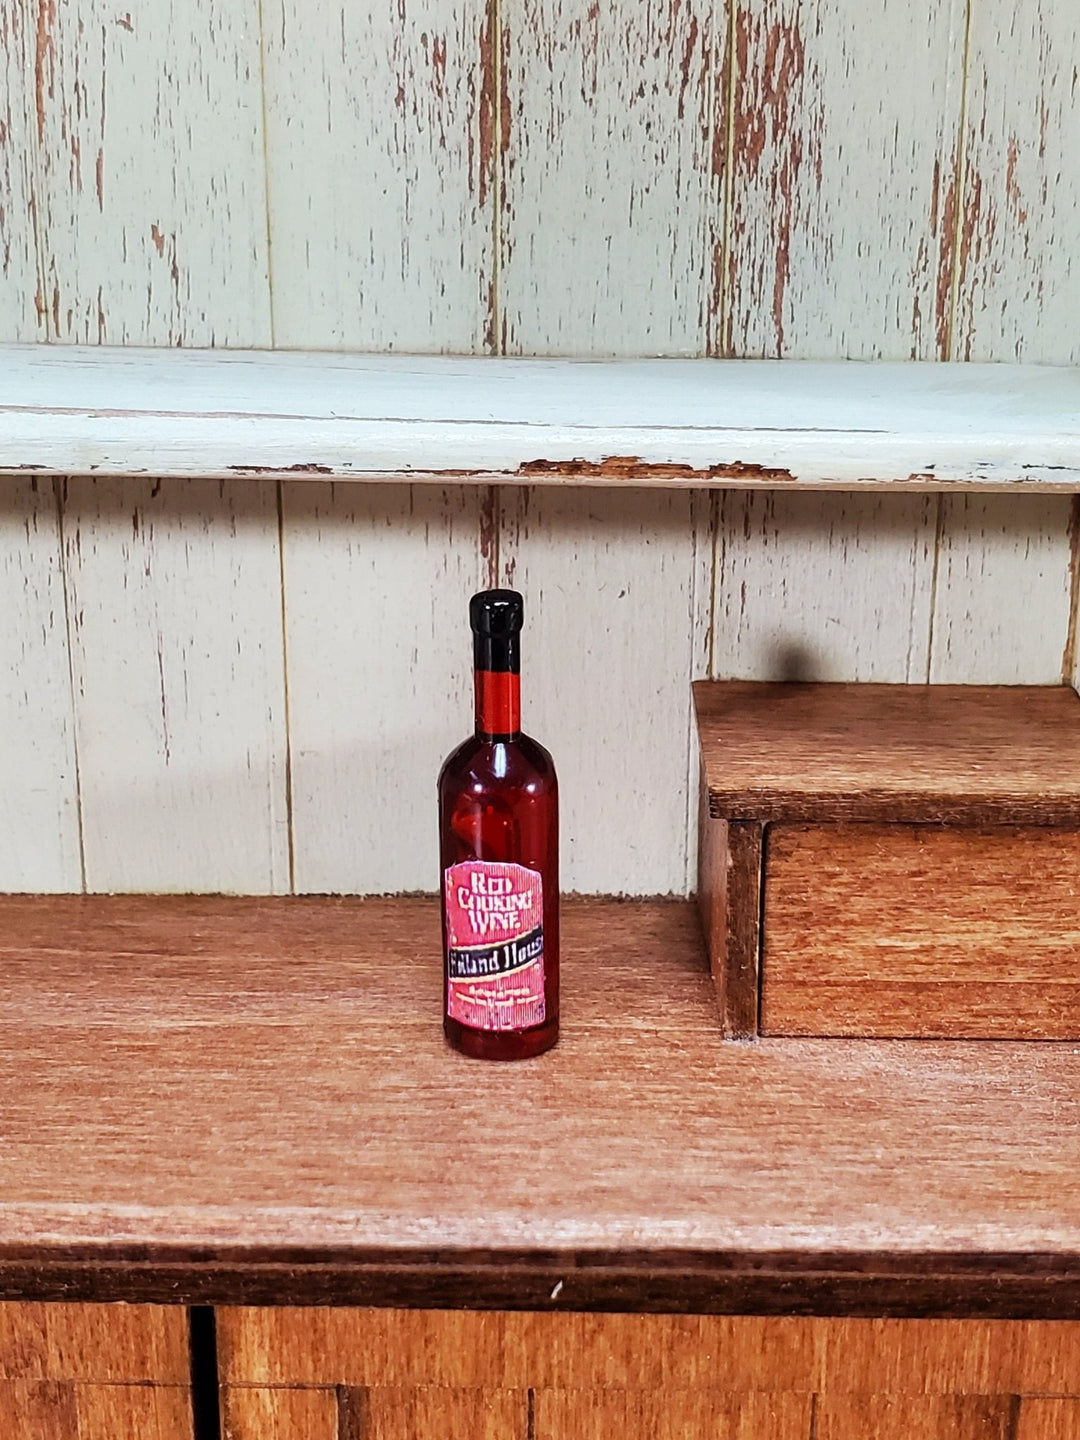 Dollhouse Red Cooking Wine Bottle 1:12 Scale Miniature Kitchen 1" Tall - Miniature Crush